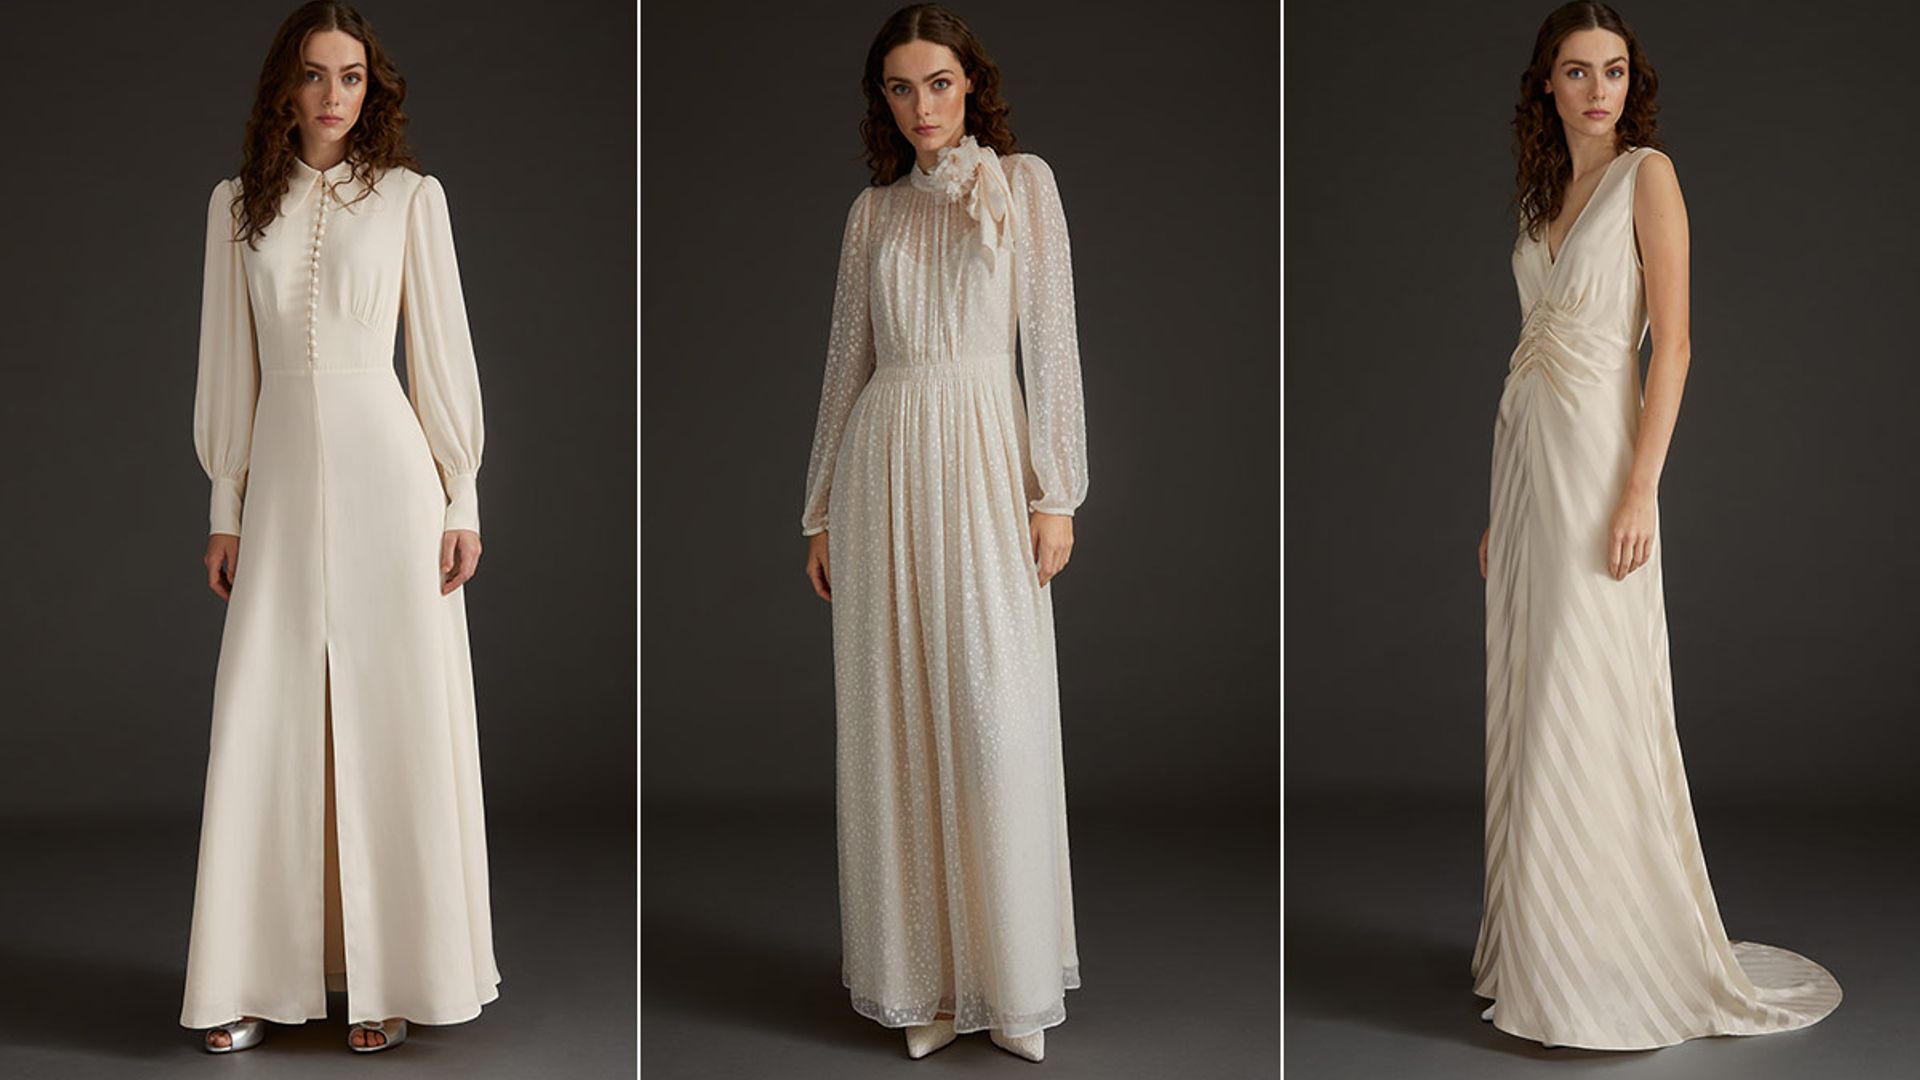 Kate Middleton's go-to fashion brand L.K.Bennett launches bridal collection fit for a royal